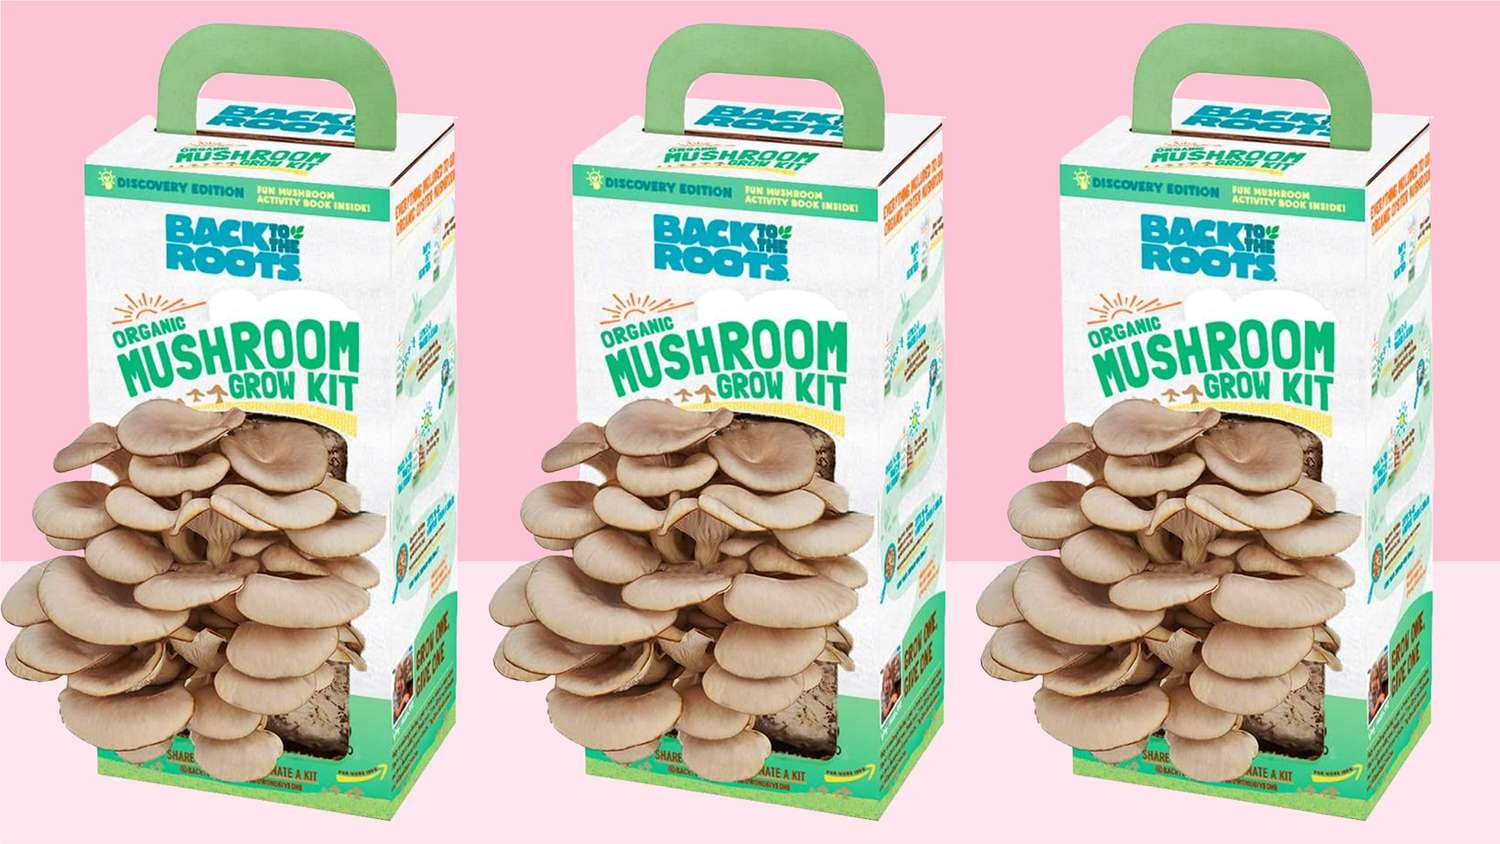 Back to the Roots Organic Mushroom Growing Kit, Harvest Gourmet Oyster